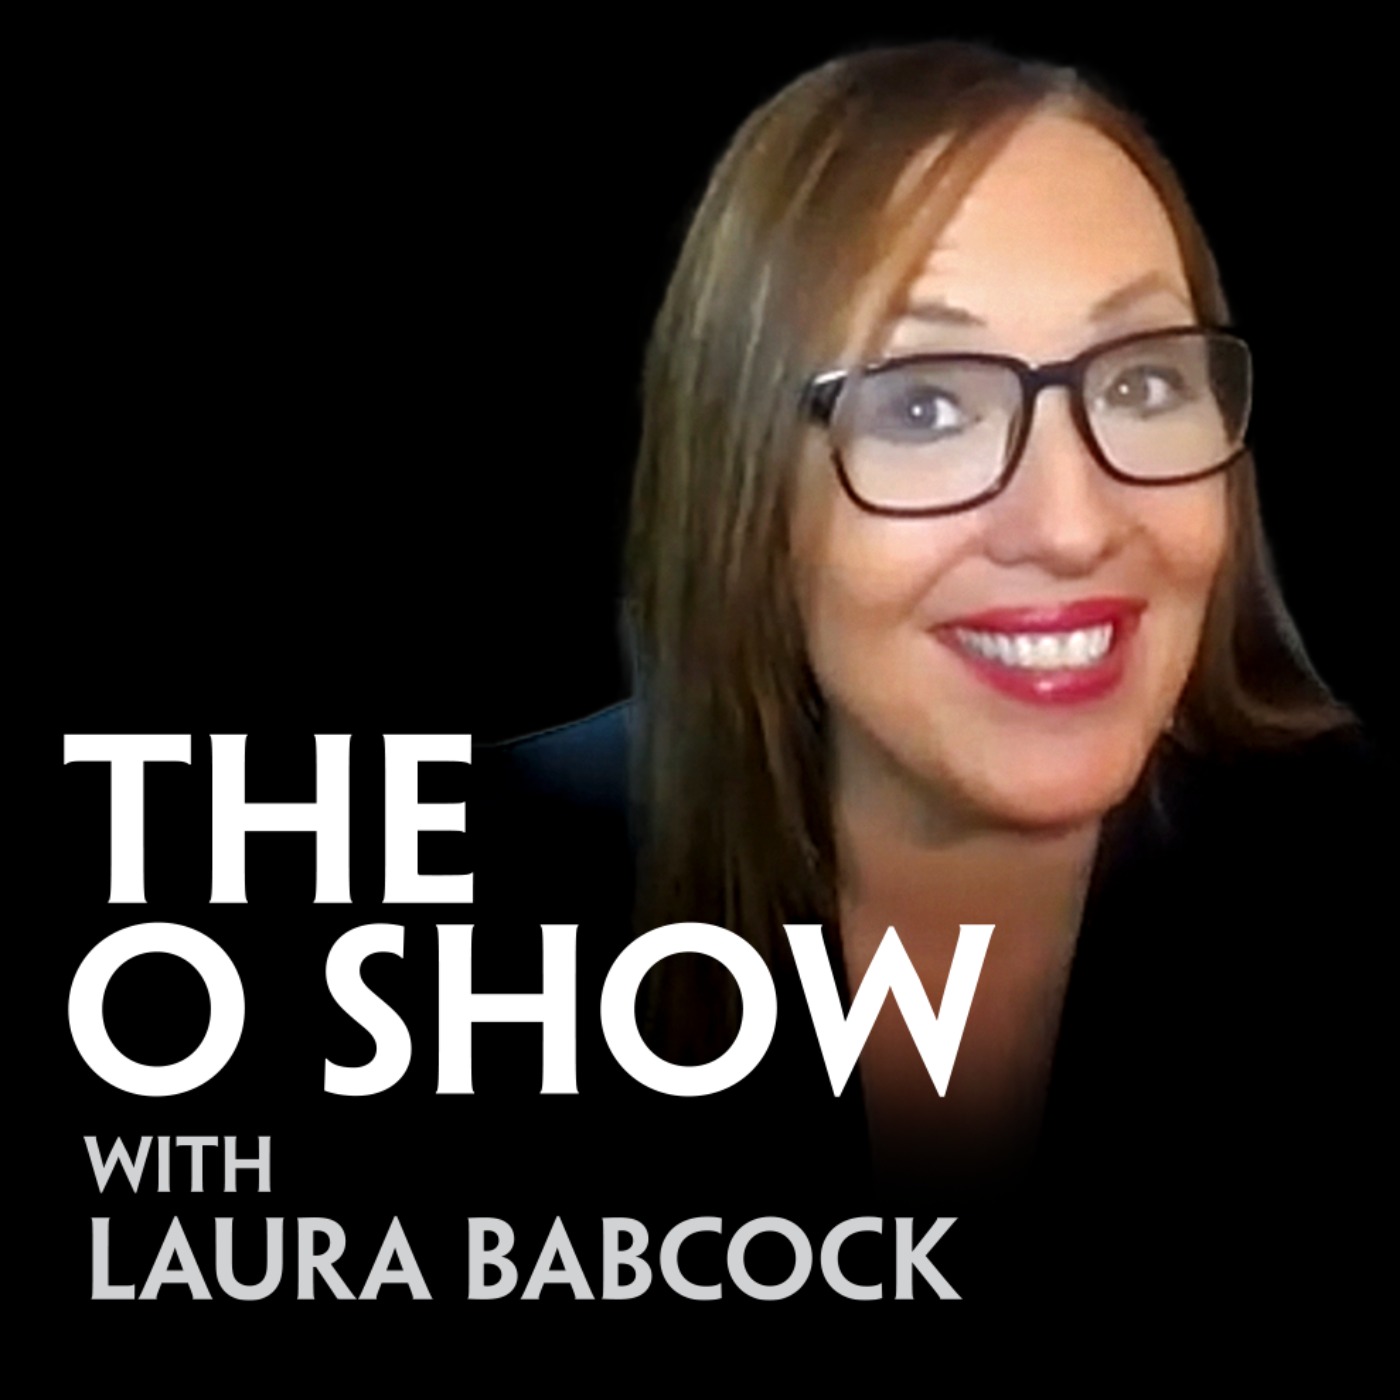 cover art for THE OSHOW WITH LAURA BABCOCK SCANDAL PANEL ON FORD'S BOOZY SCHEME AND NEW GREENBELT SCANDAL